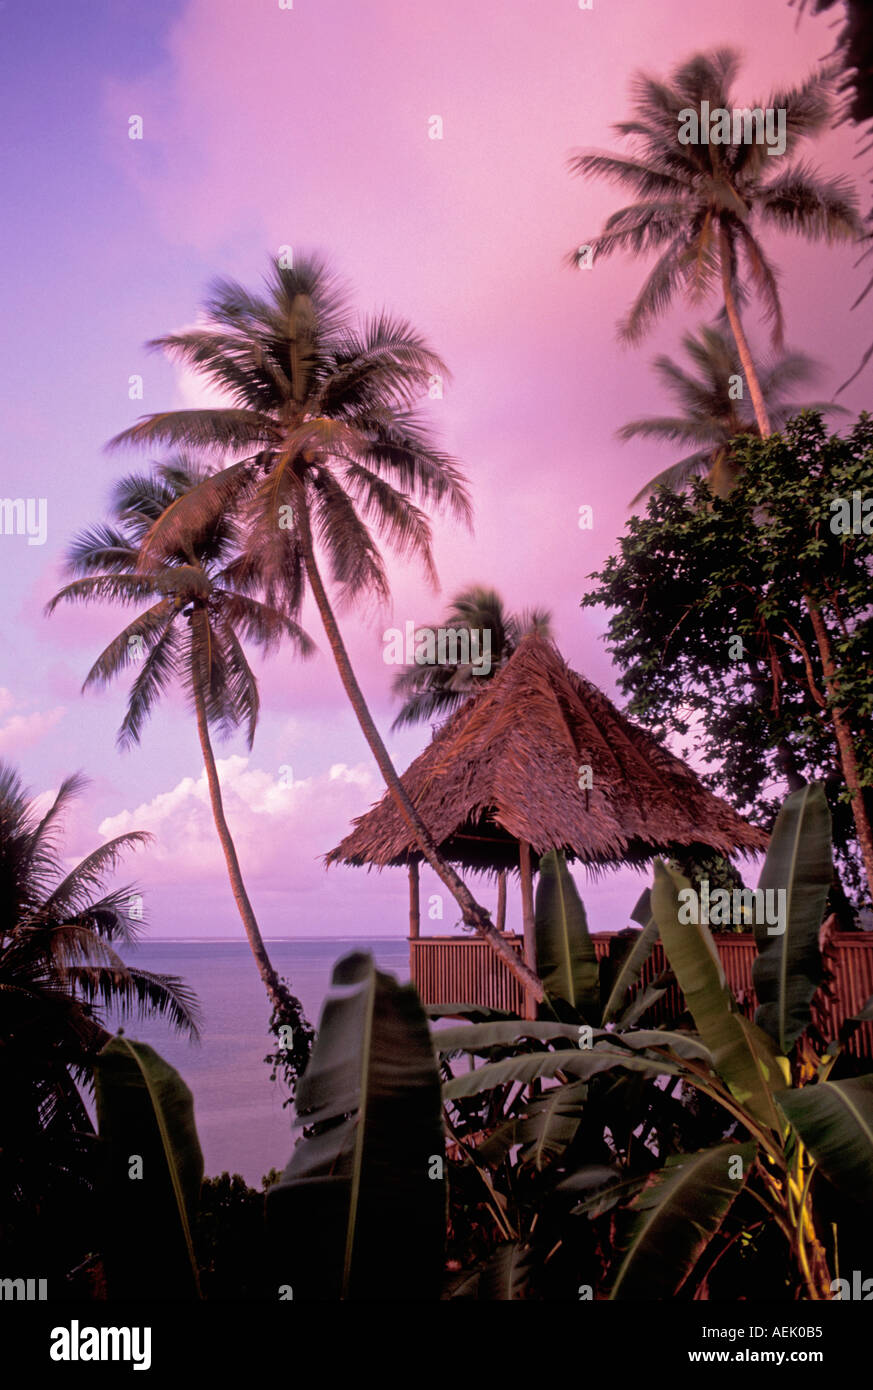 The Village Hotel thatch roofed gazebo and view from bar at dusk Pohnpei Micronesia Stock Photo